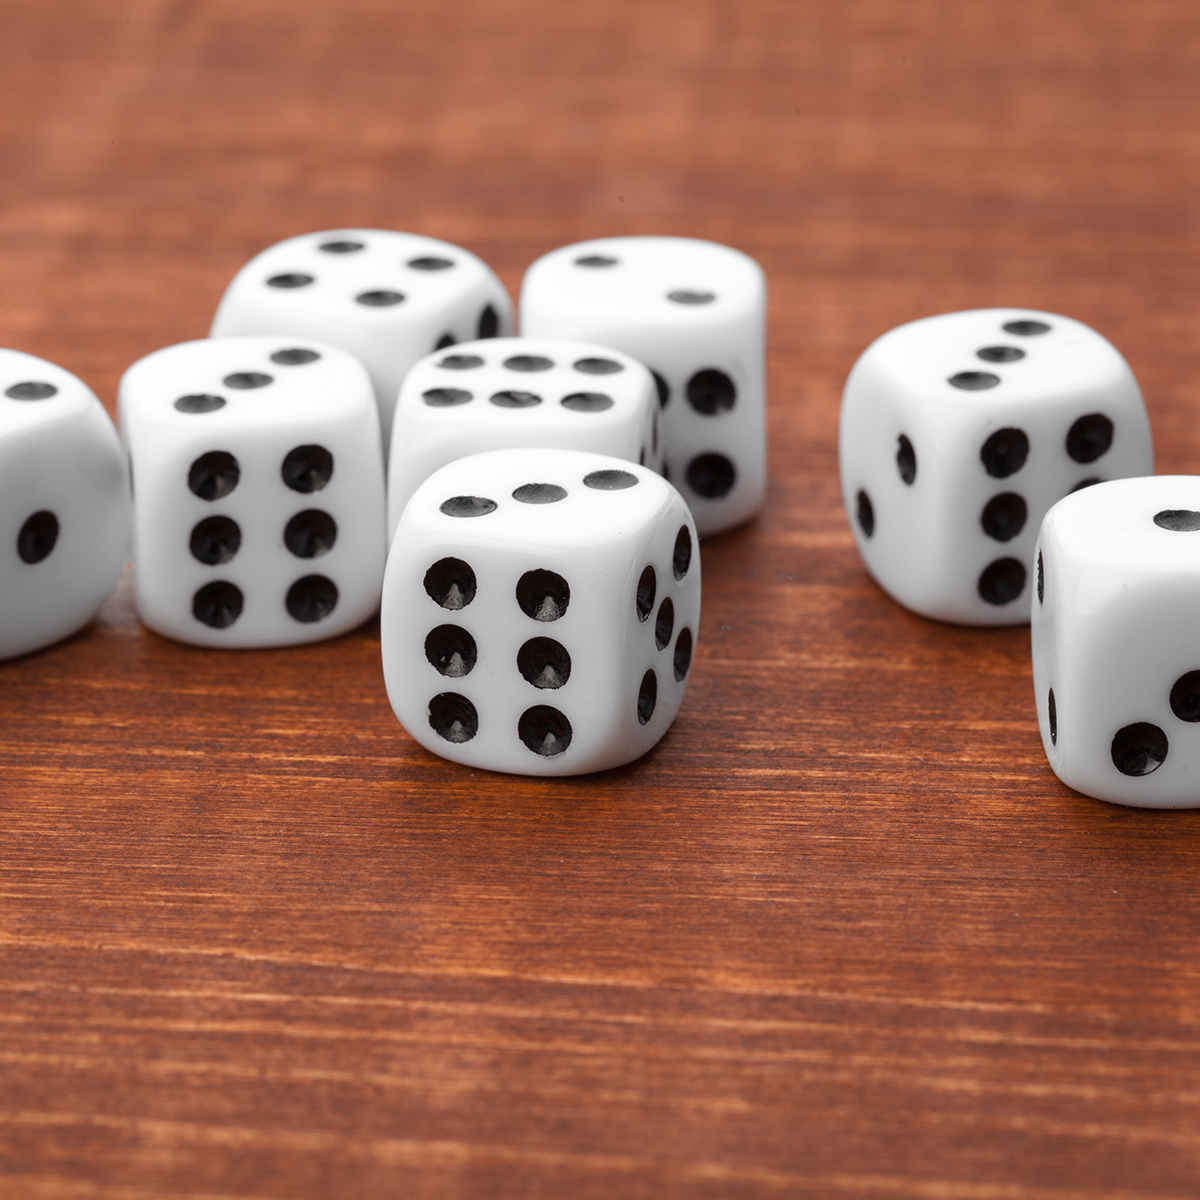 six-sided dice on tabletop